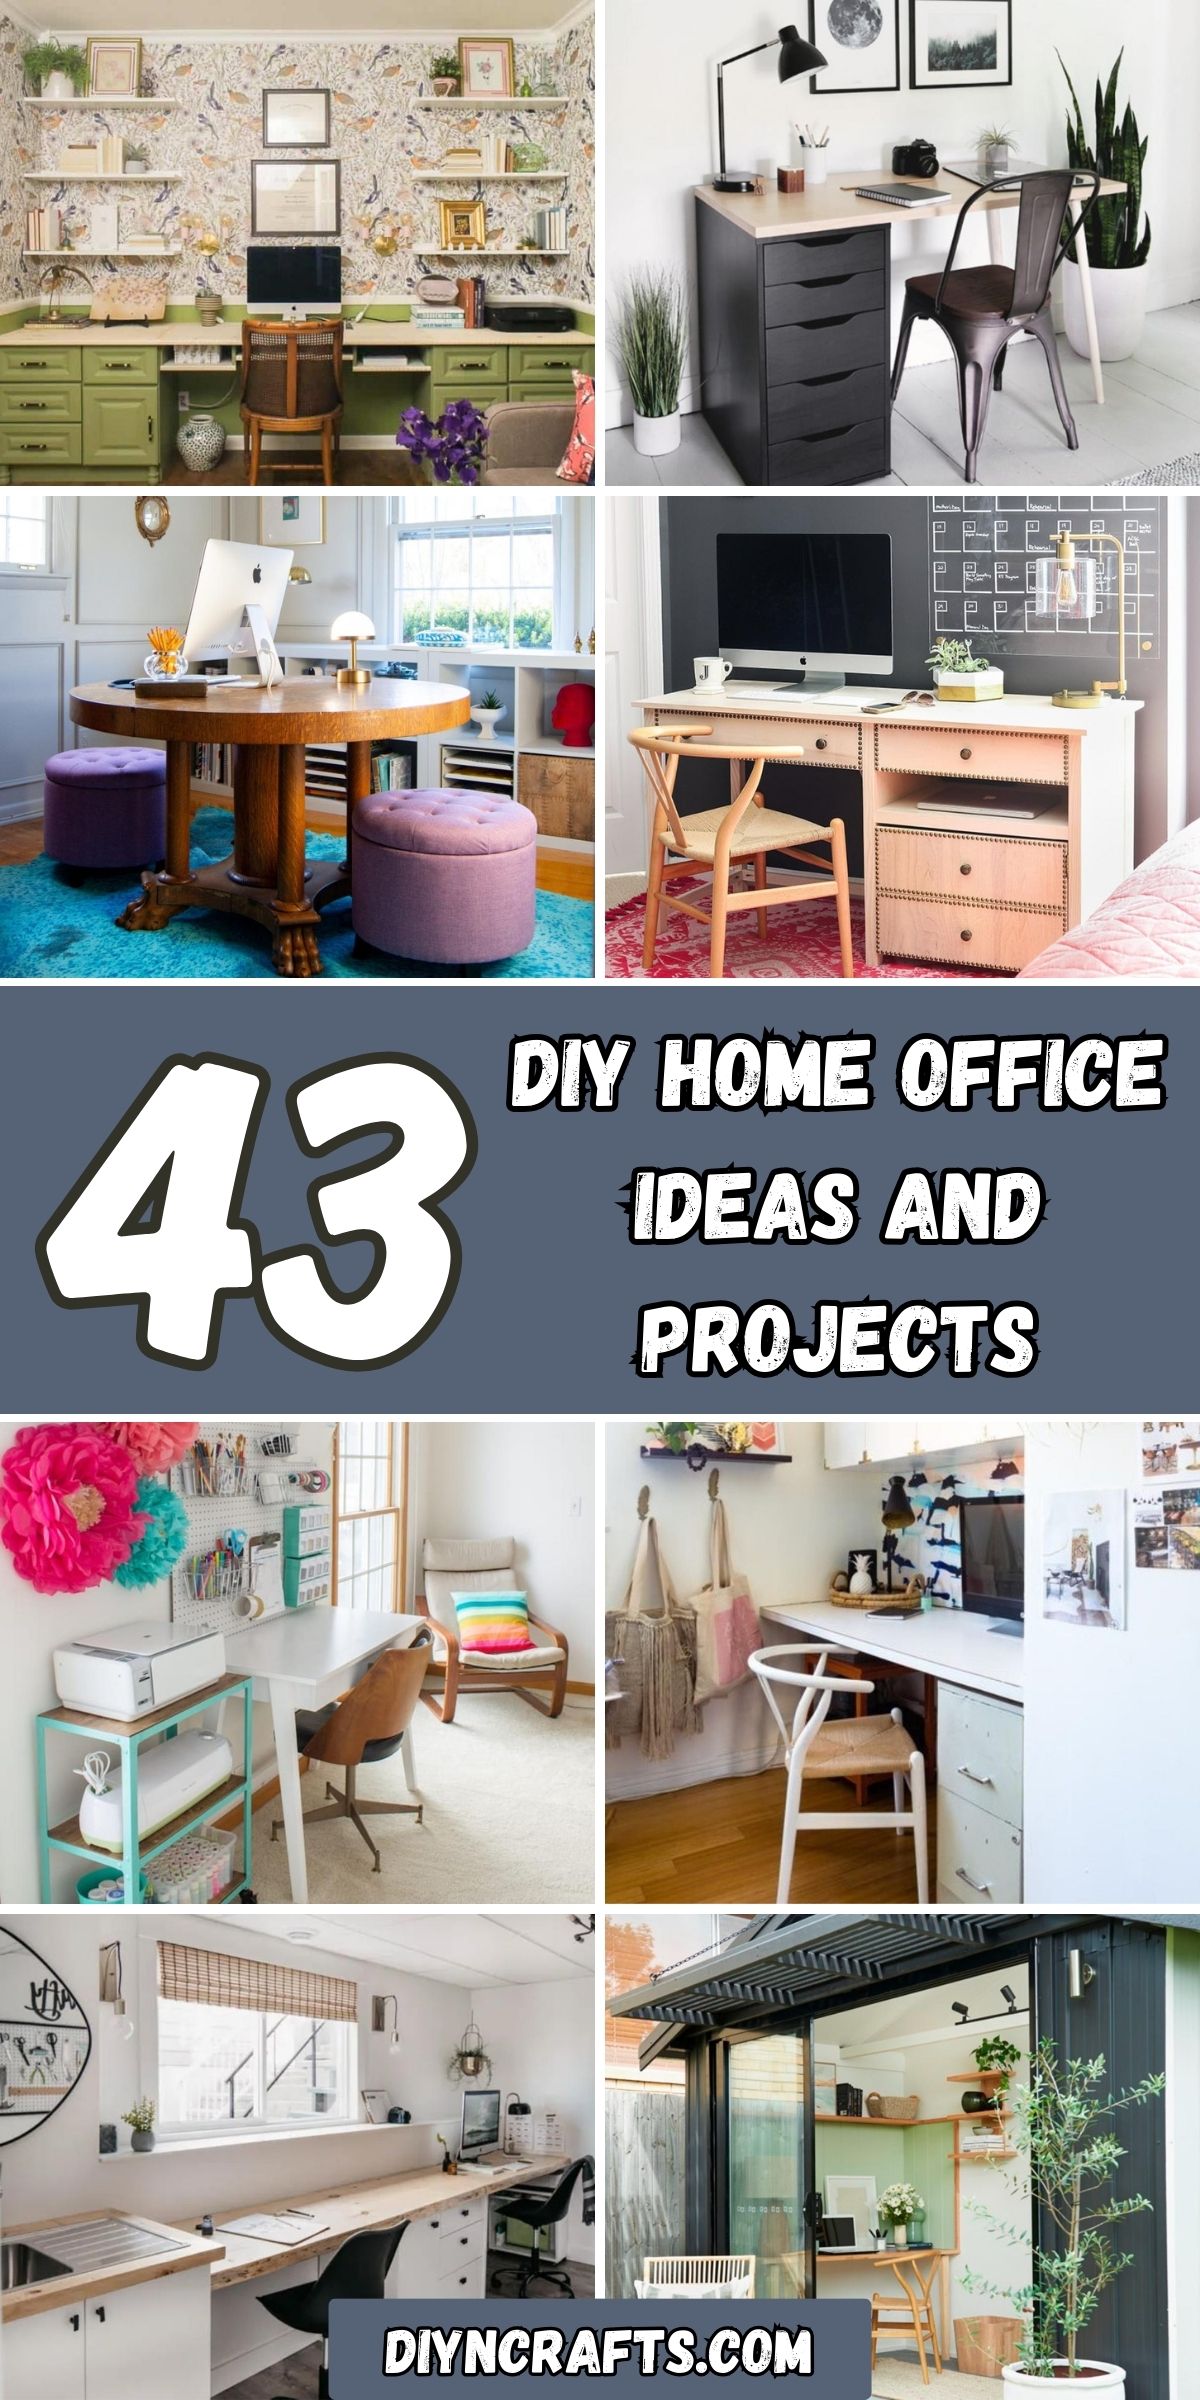 43 DIY Home Office Ideas and Projects - DIY & Crafts